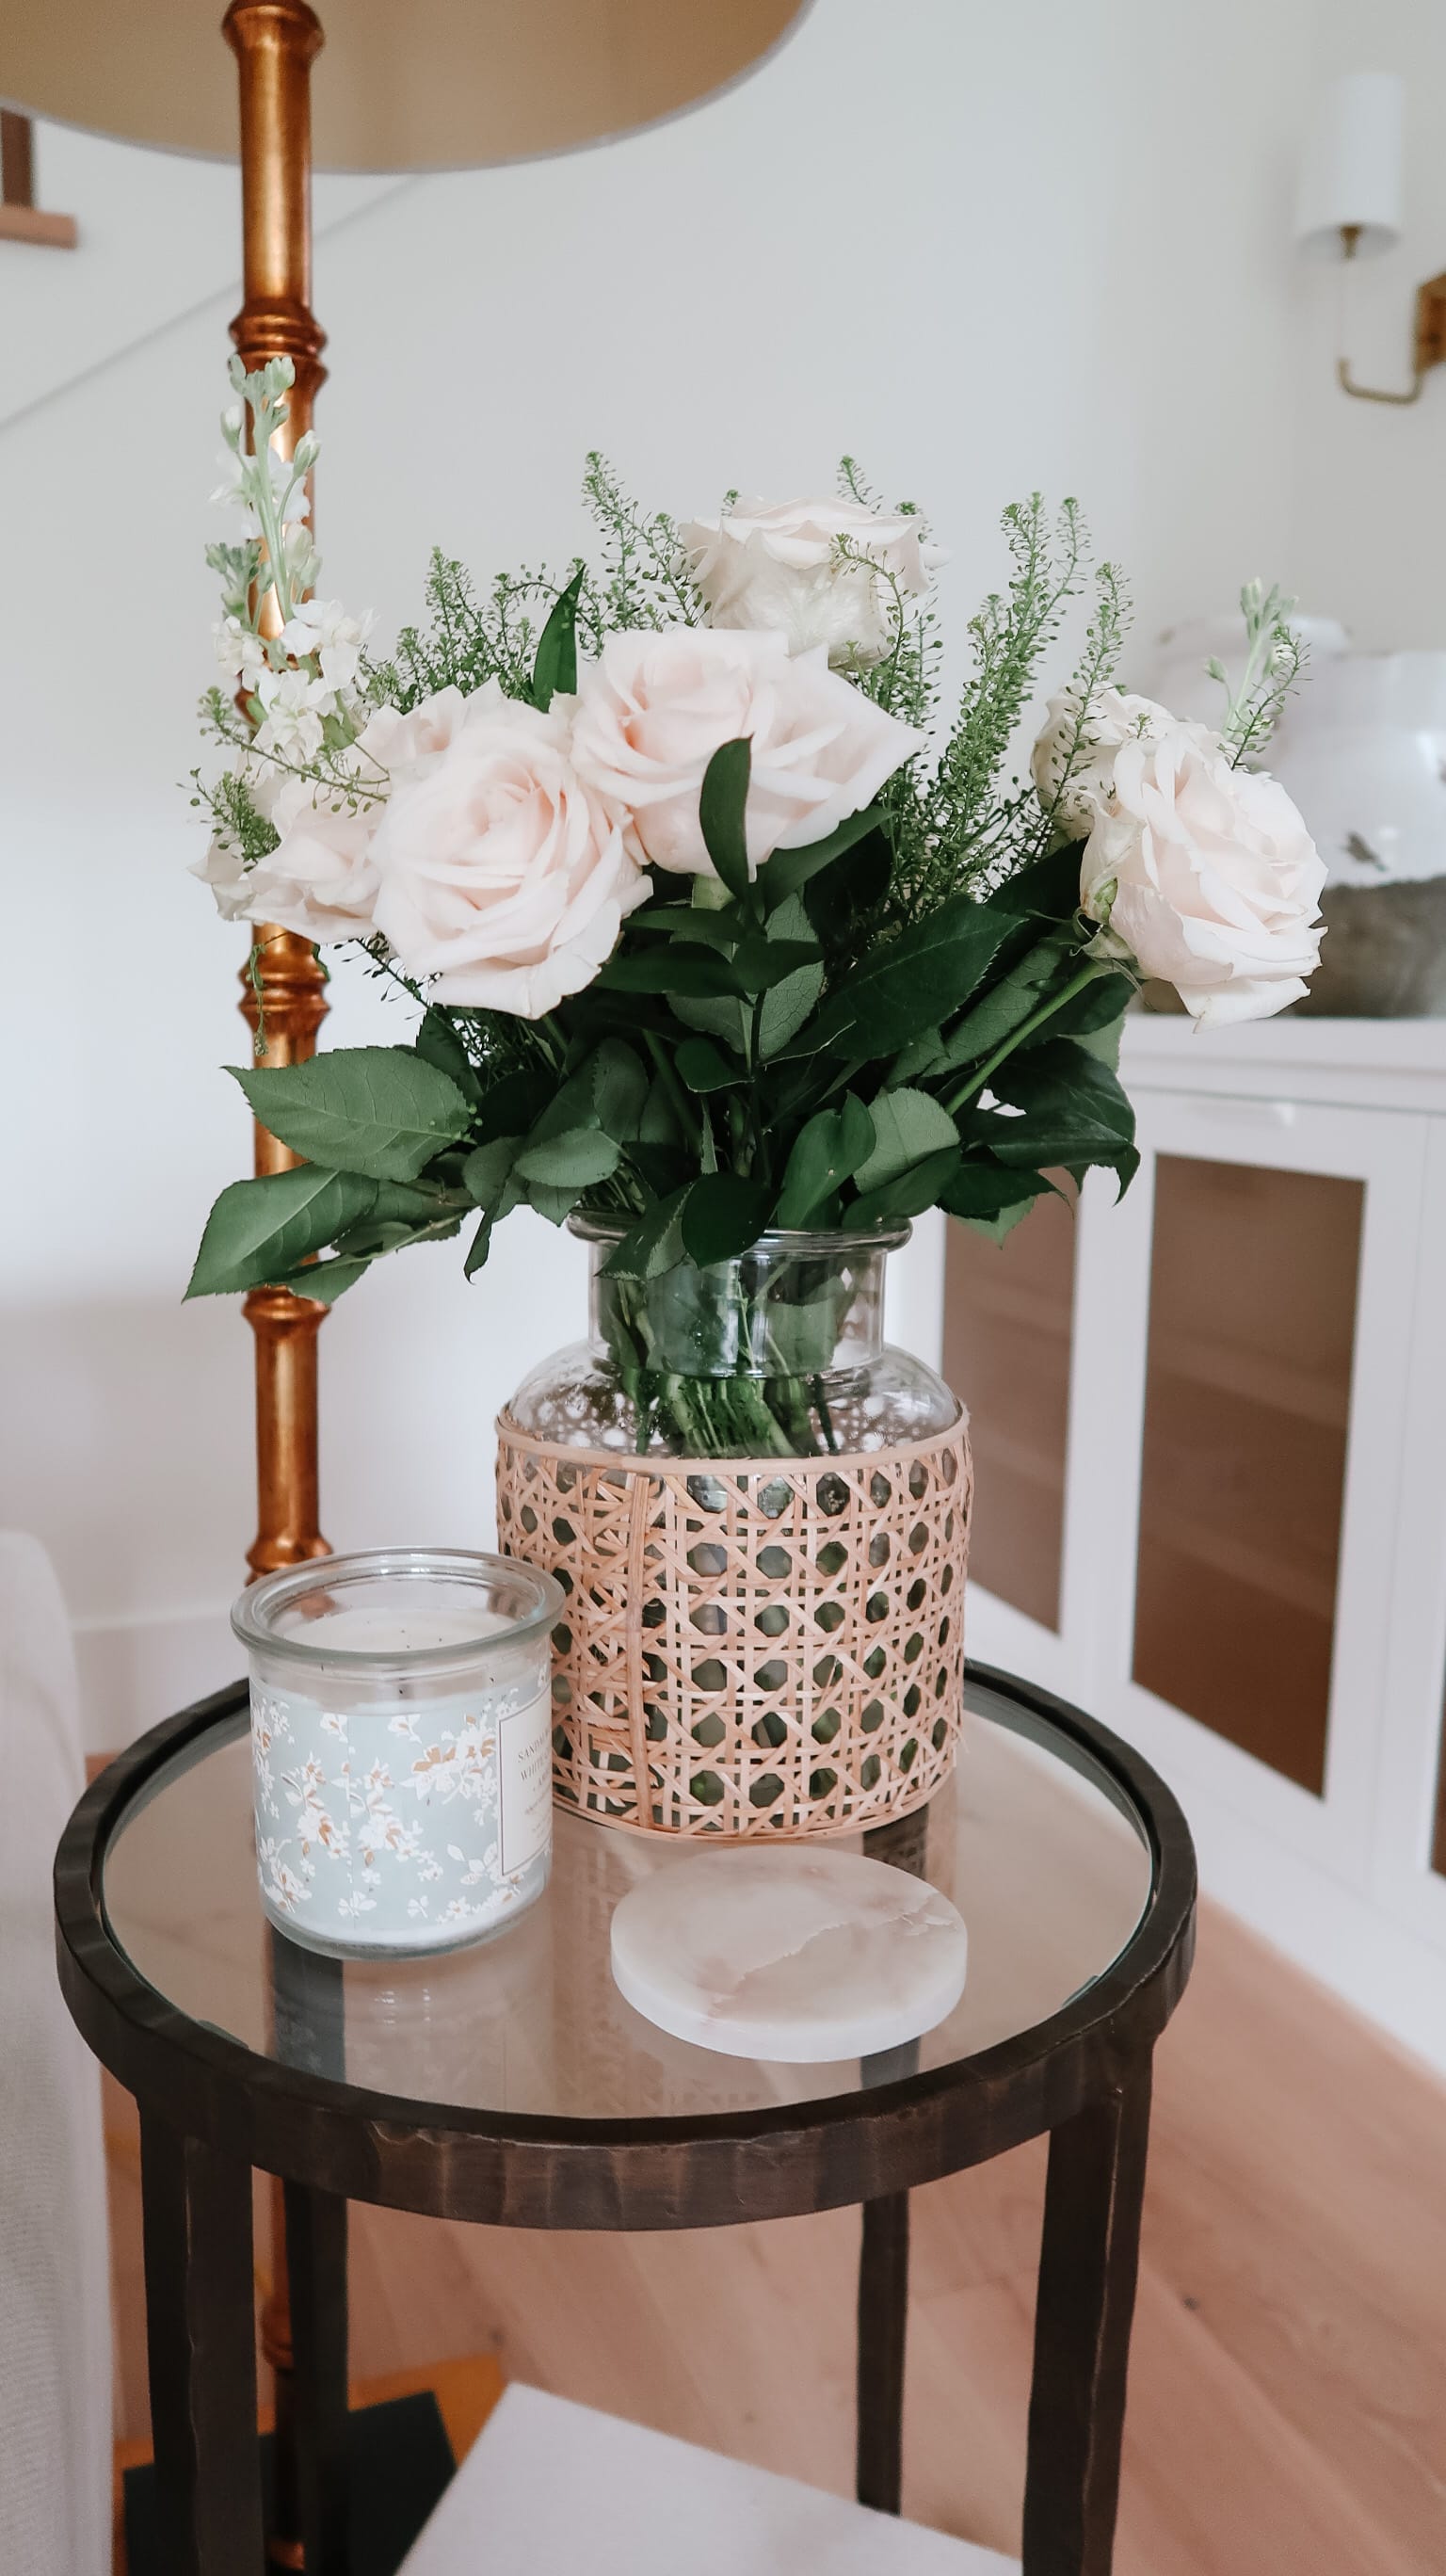 New Decor | Rugs, Lamps, & Vases